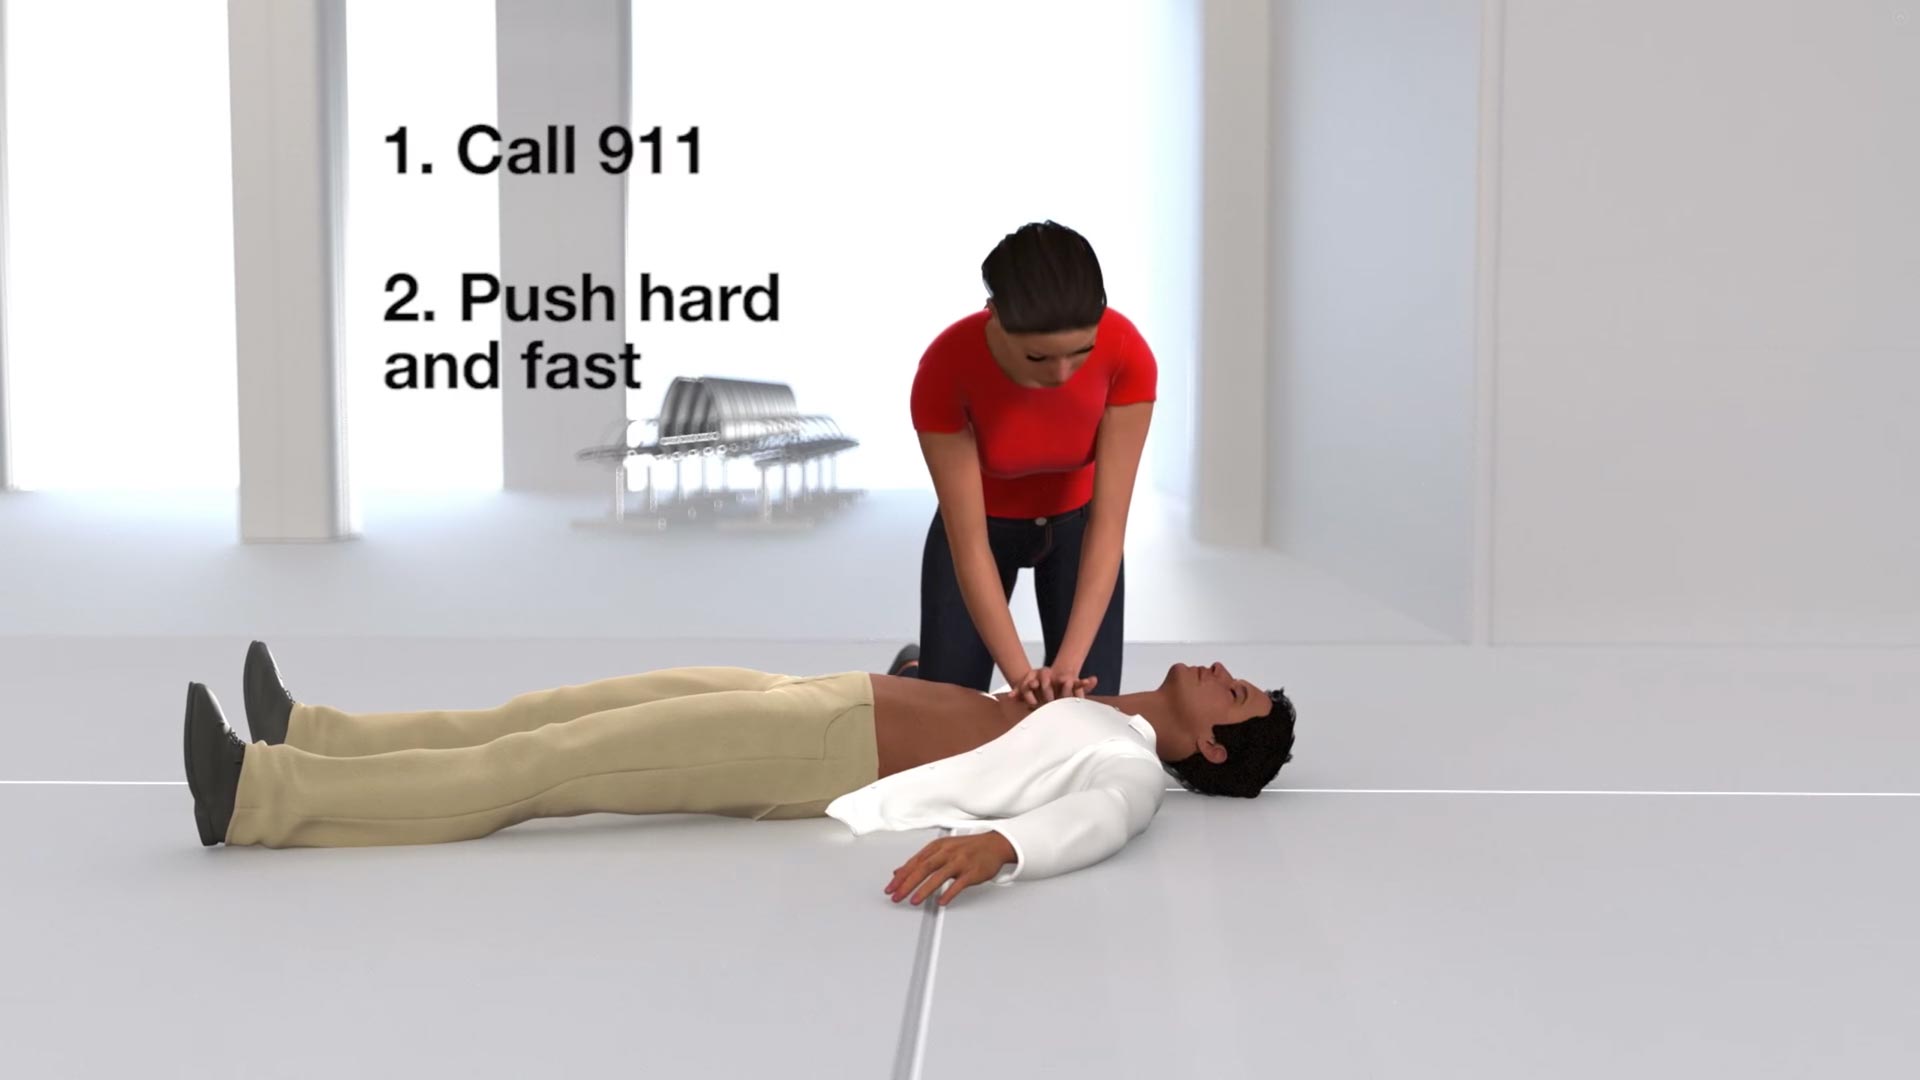 Animation of a person giving cpr for a video placeholder.